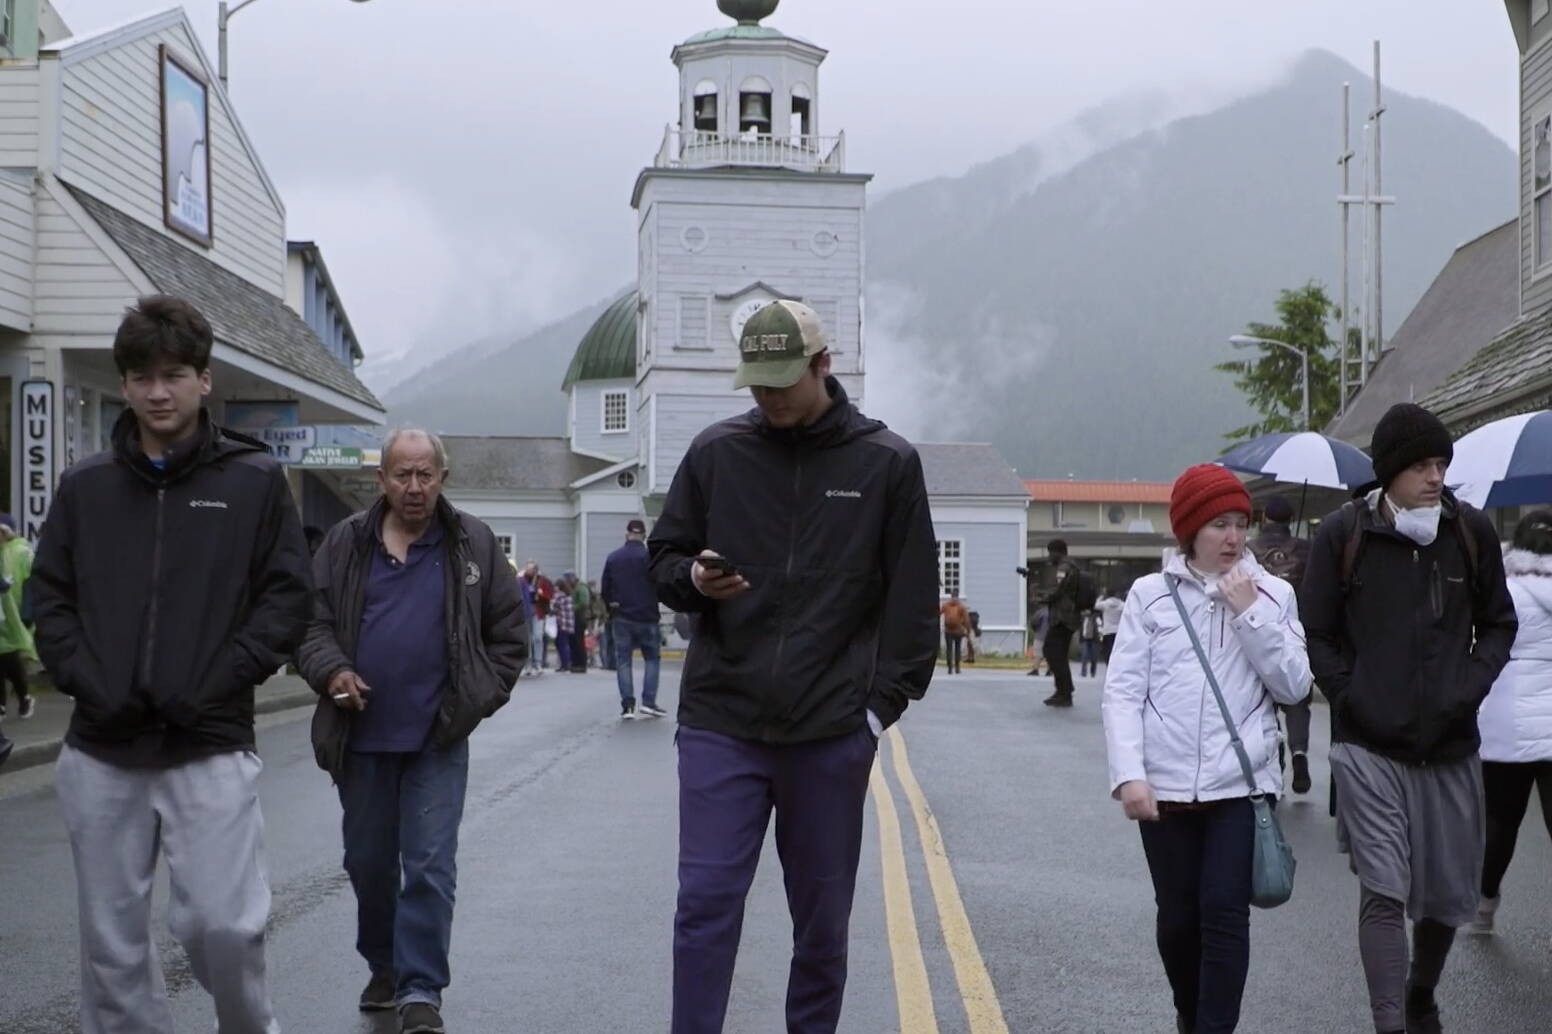 Tourists explore downtown Sitka in the documentary “Cruise Boom,” which is screening Friday at the University of Alaska Southeast and Saturday at the Gold Town Theater. (Courtesy of Artchange Inc.)